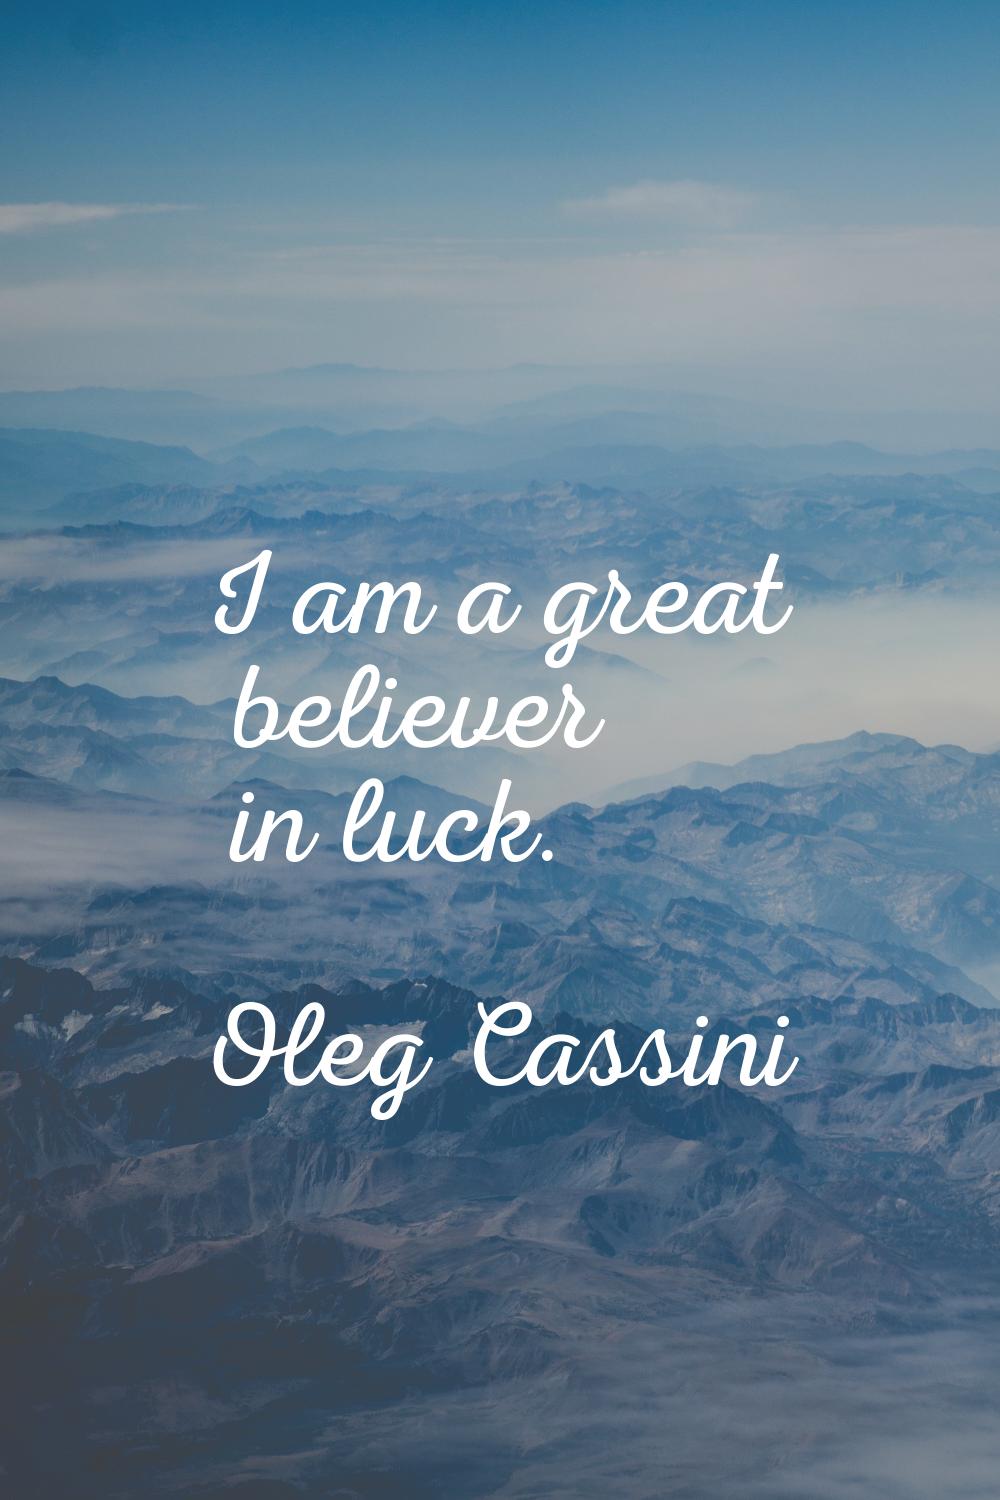 I am a great believer in luck.